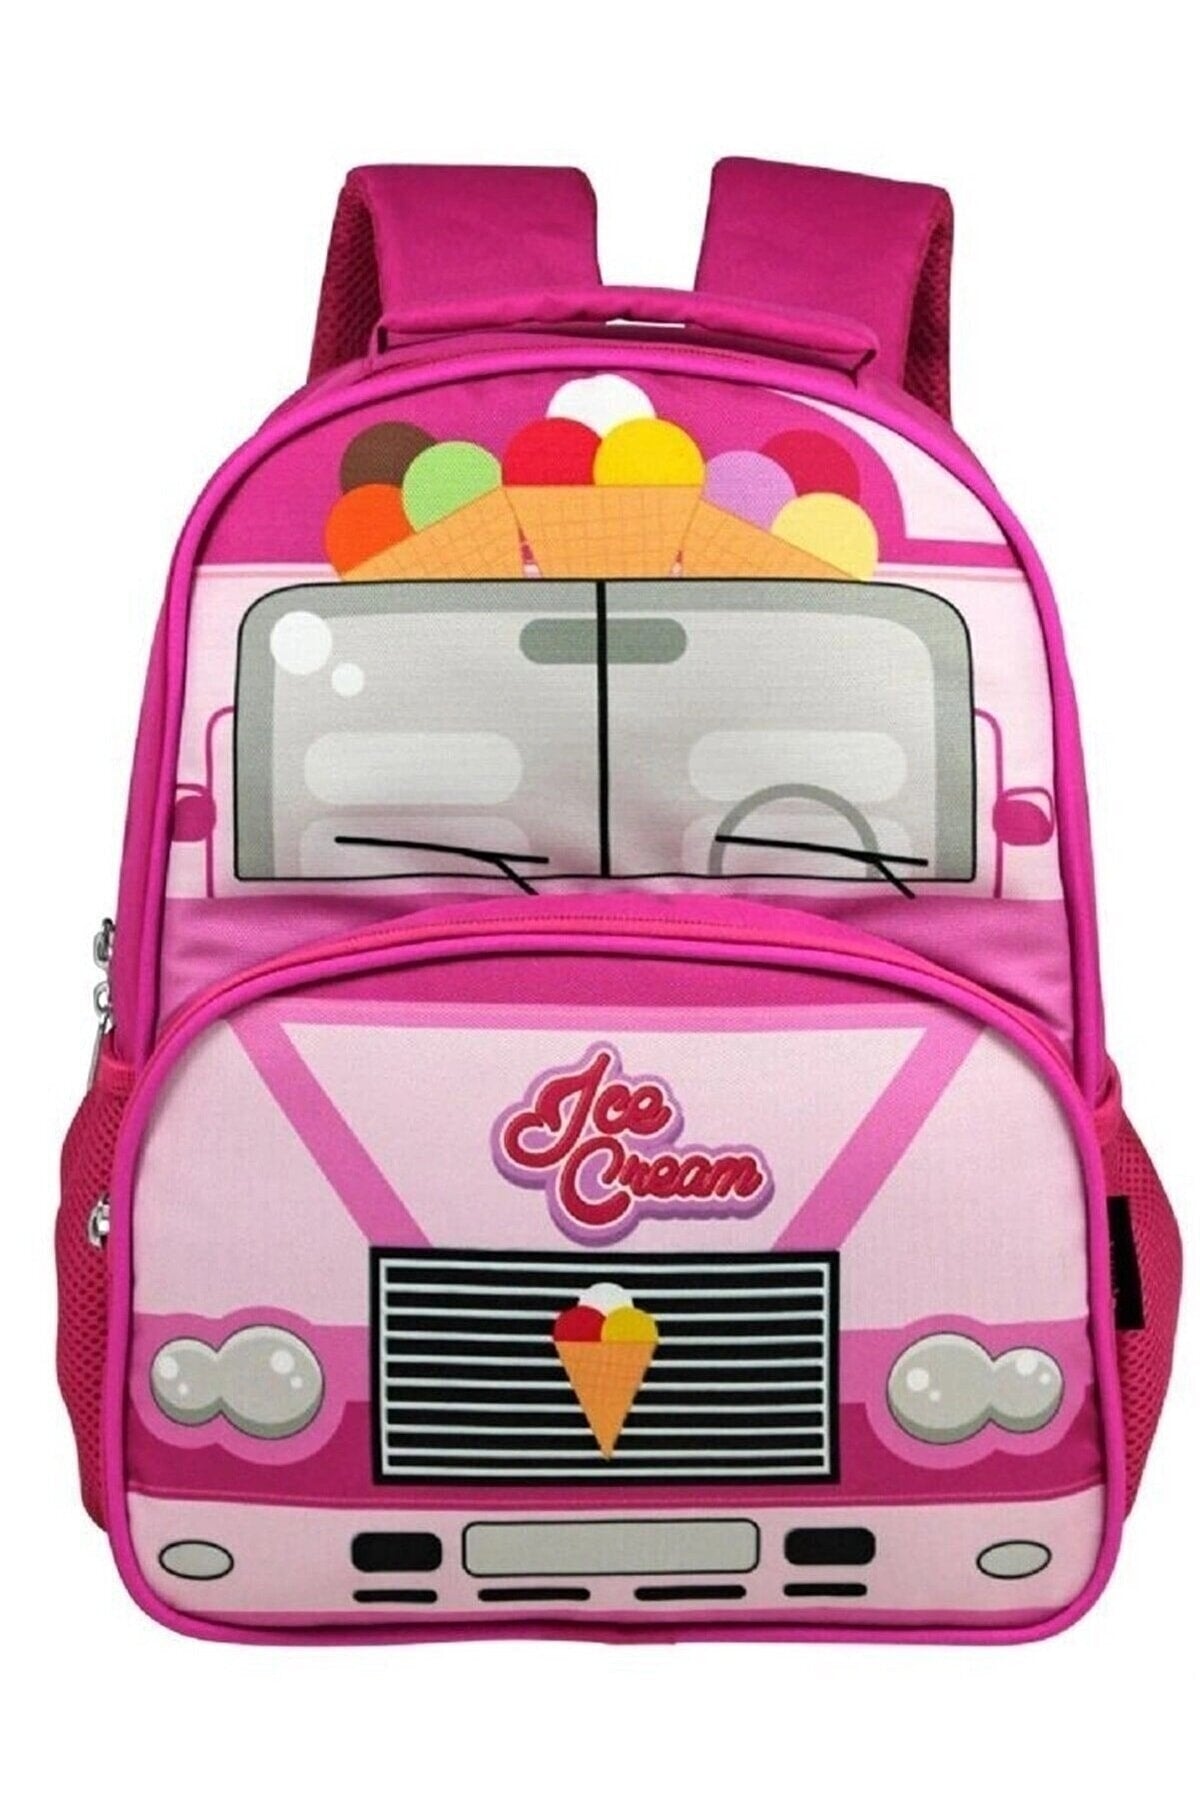 -Ümit Bag-Cennec Ice Cream Printed Girl's School Bag and Lunch Box Set